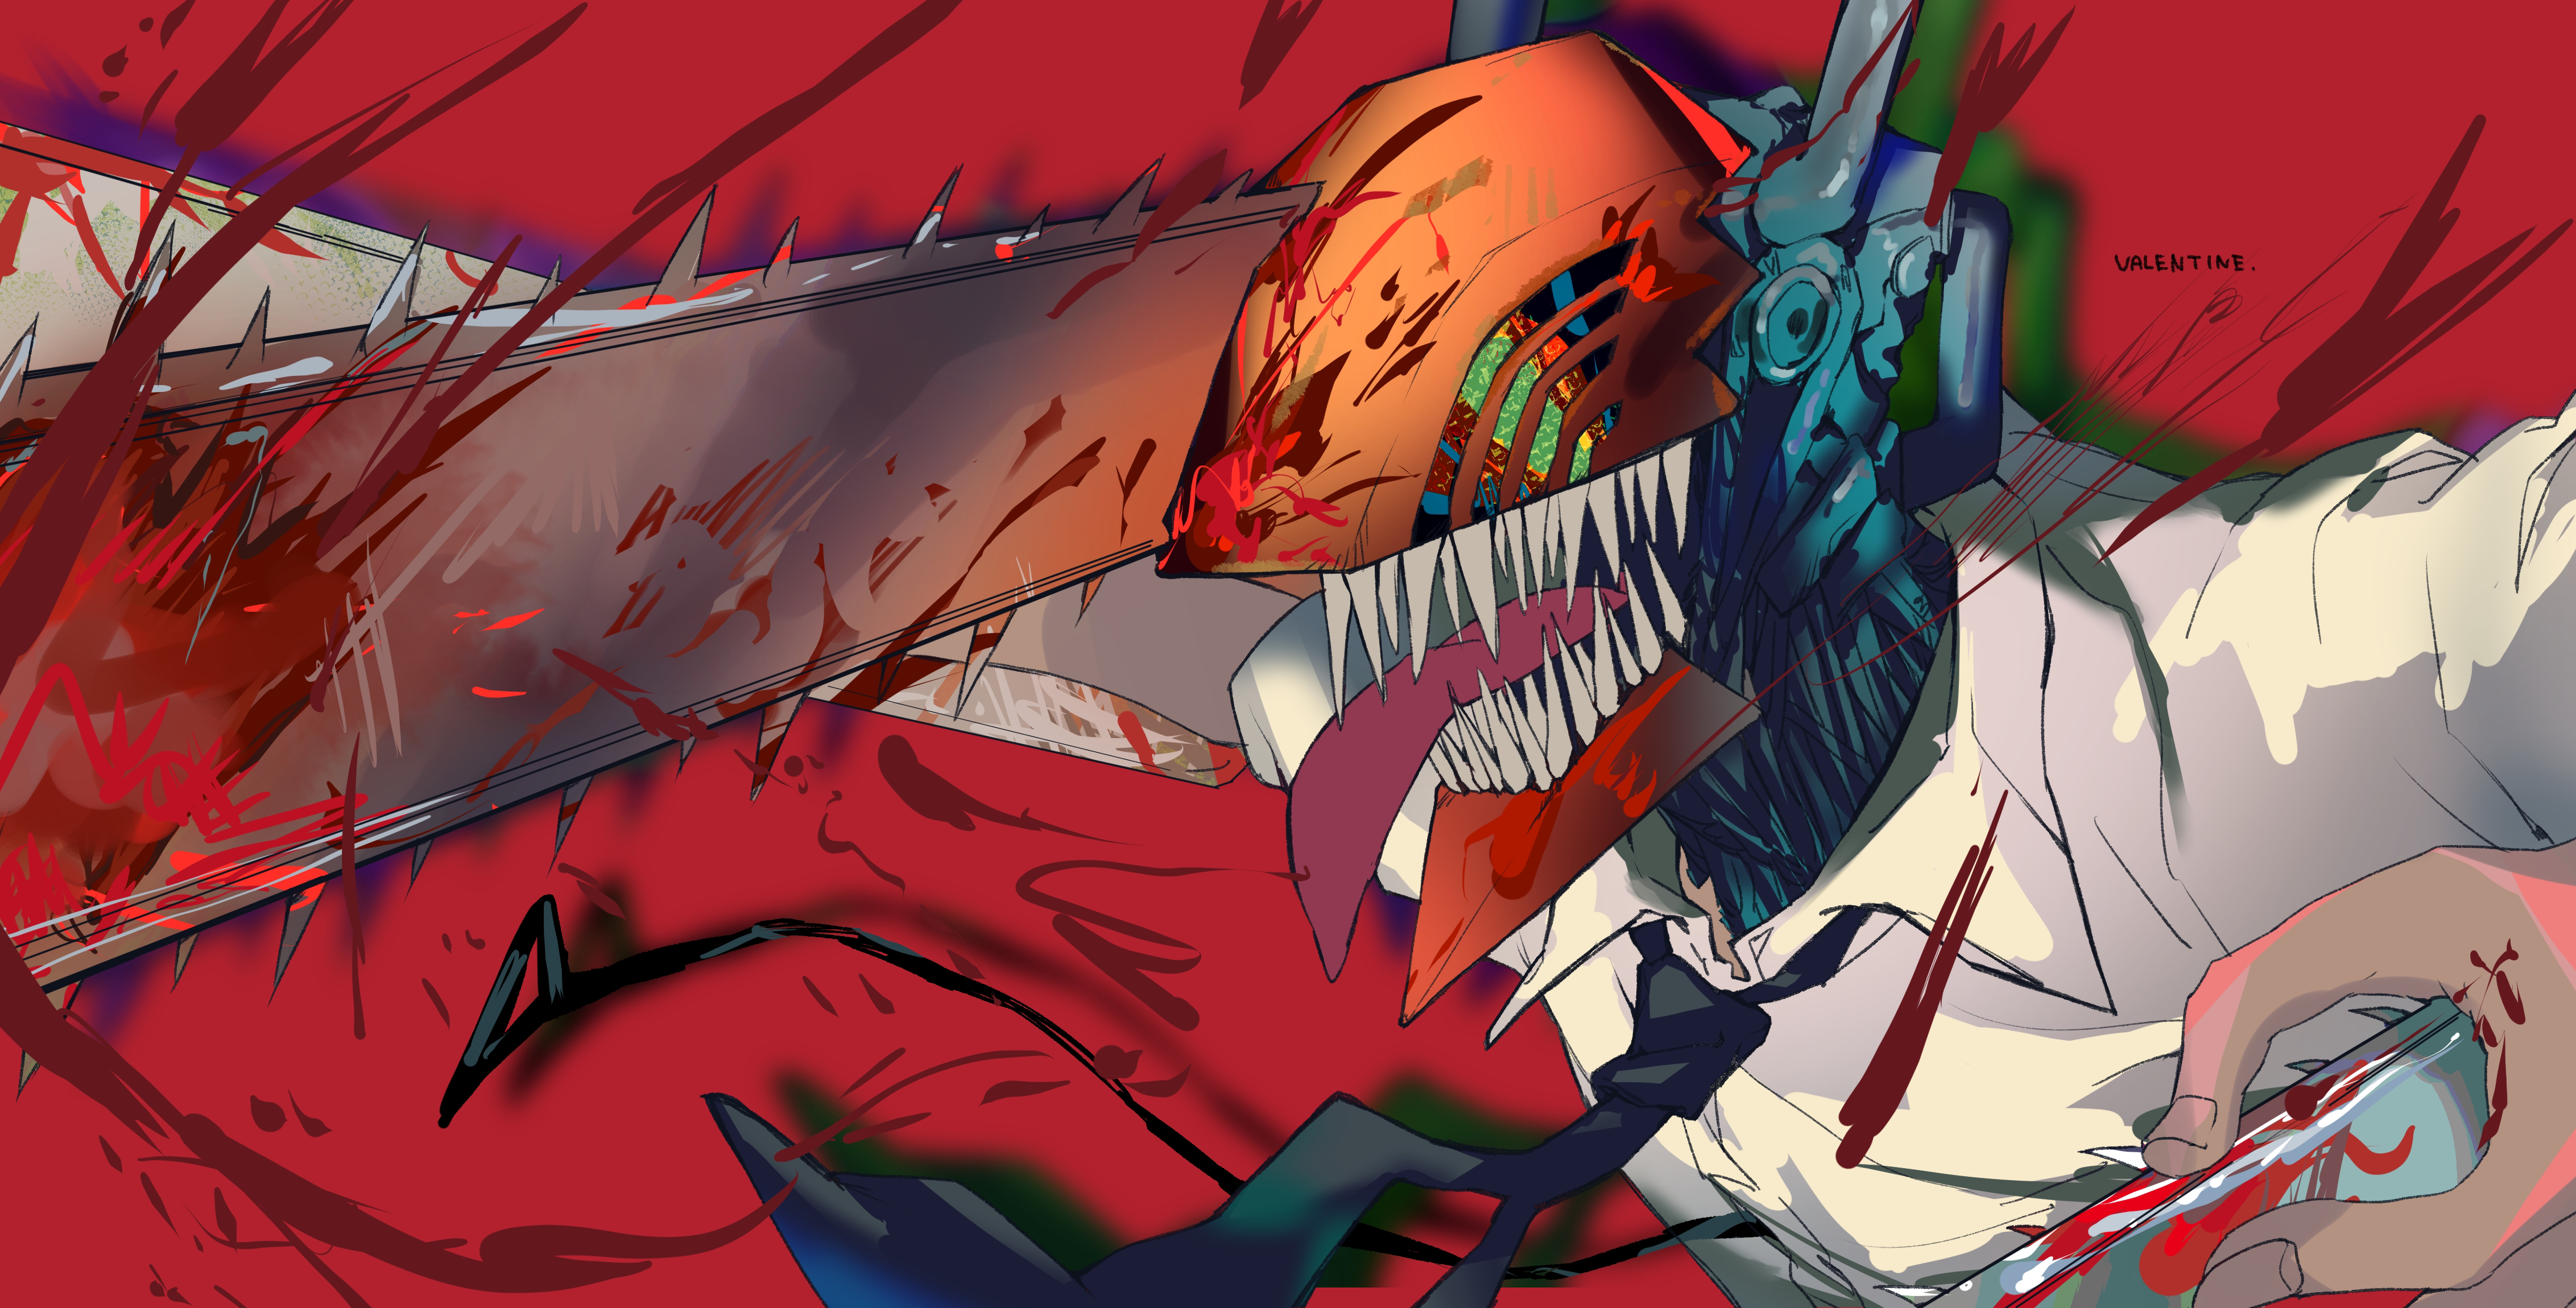 Anime 4529x2300 Chainsaw Man Denji (Chainsaw Man) chainsaws blood blood covered body red background anime boys anime